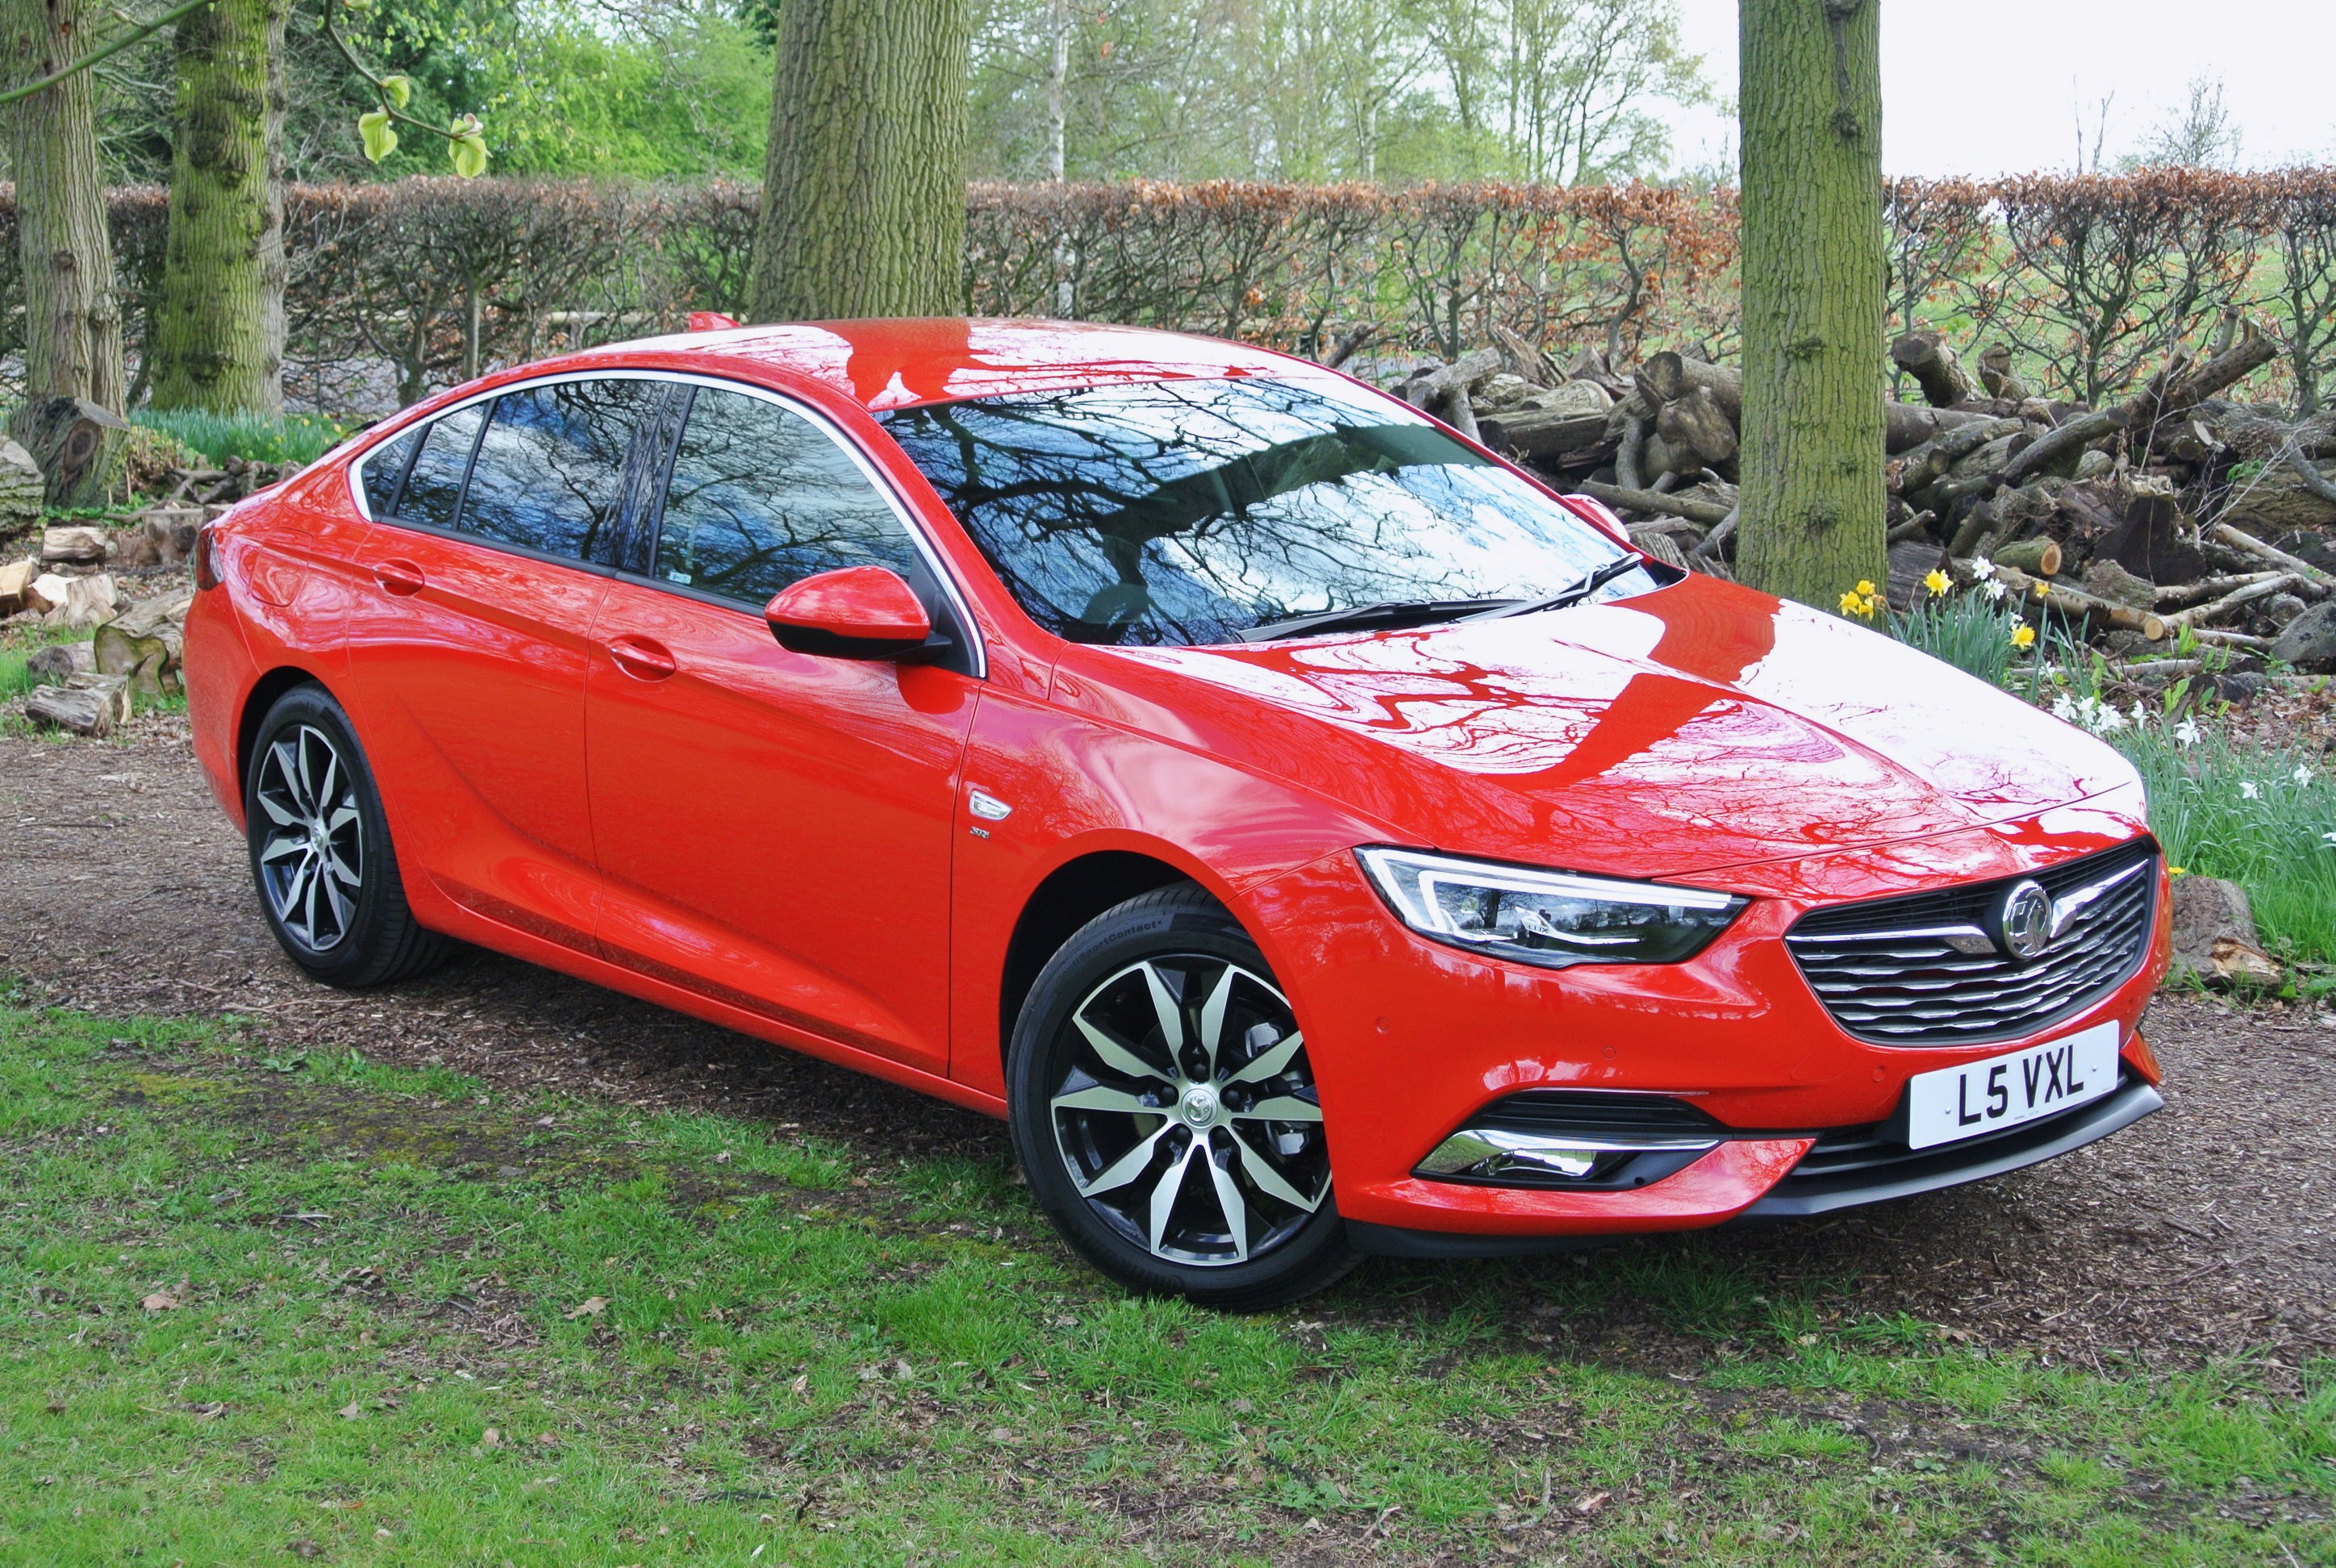 Vauxhall turns the ace Insignia into a seriously special Grand Sport